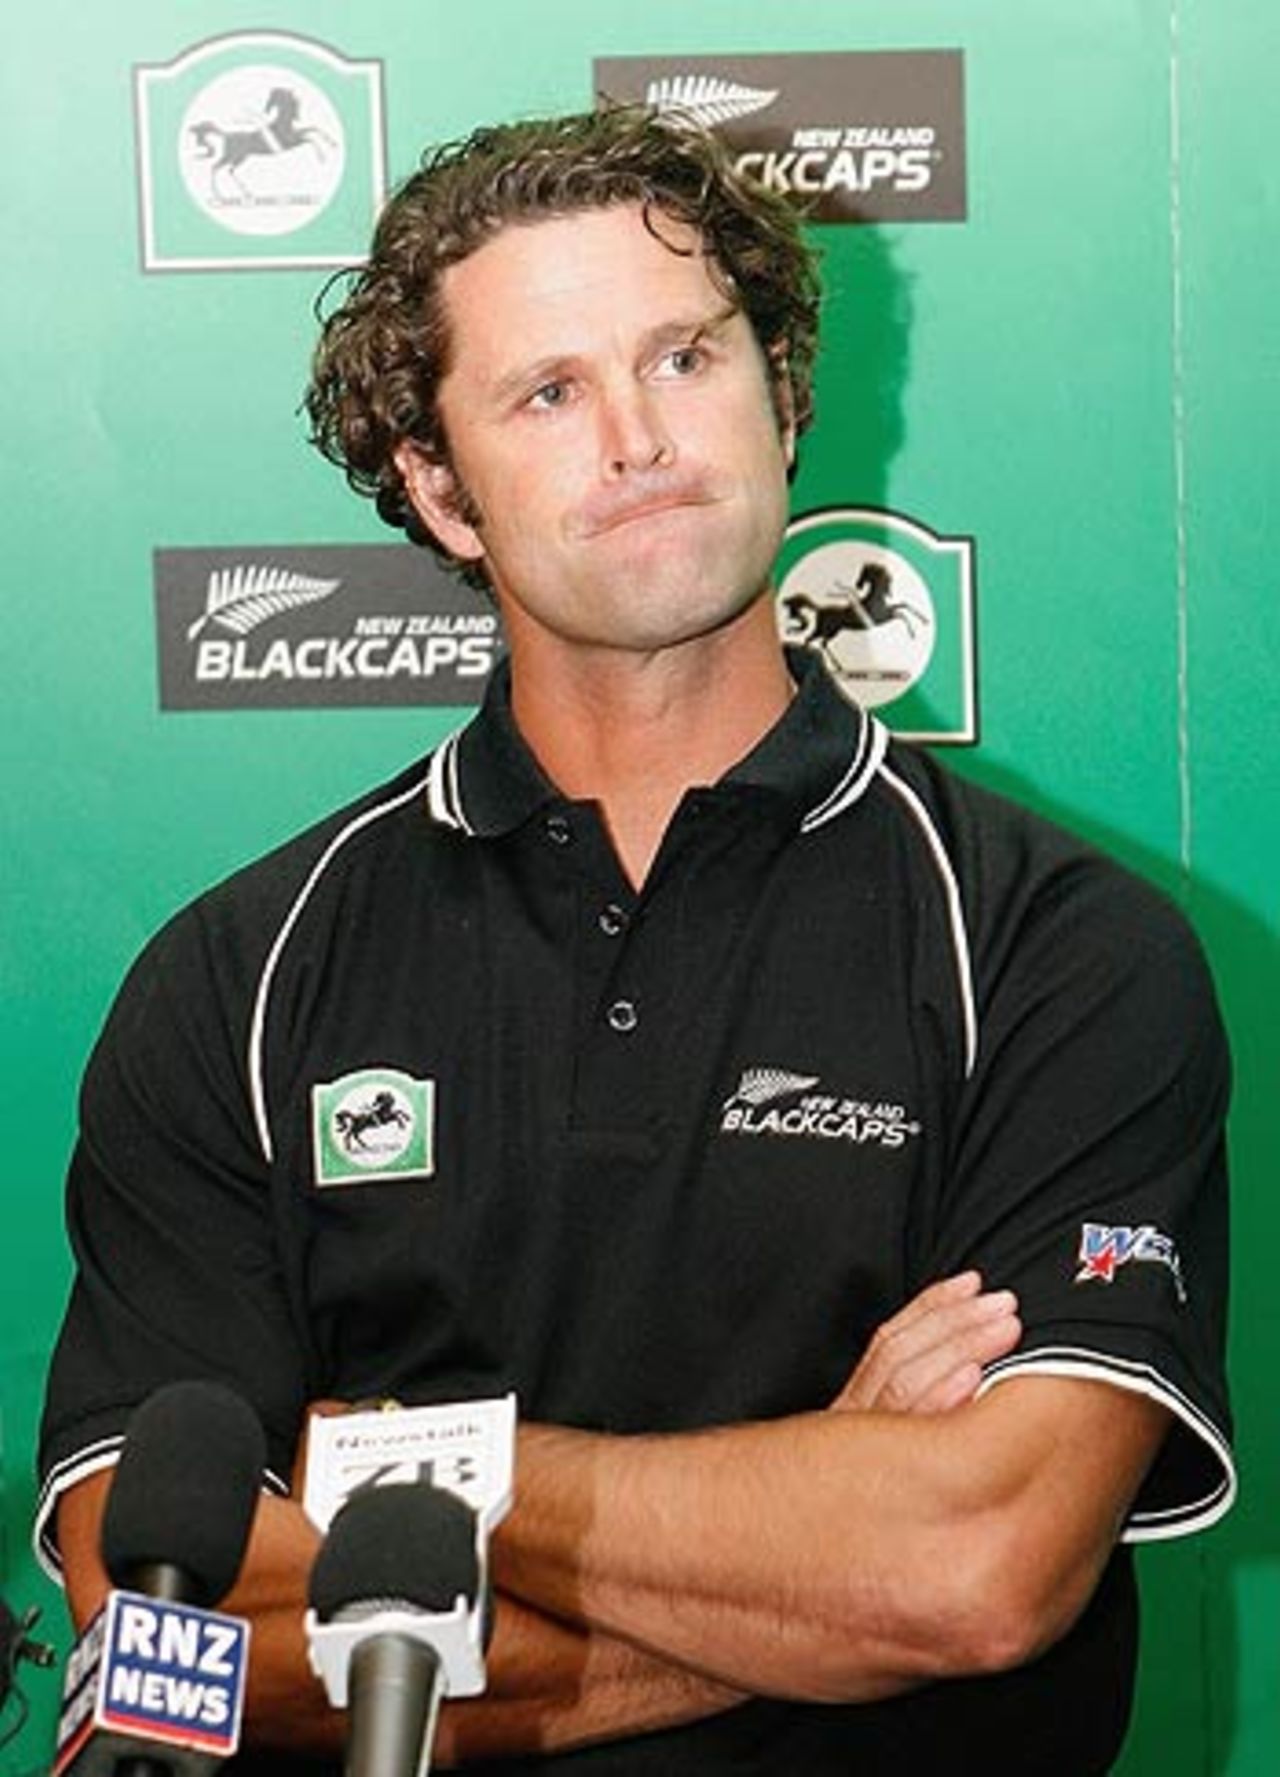 Chris Cairns pauses during the announcement of his retirement from international cricket at a news conference in Christchurch, January 23, 2006